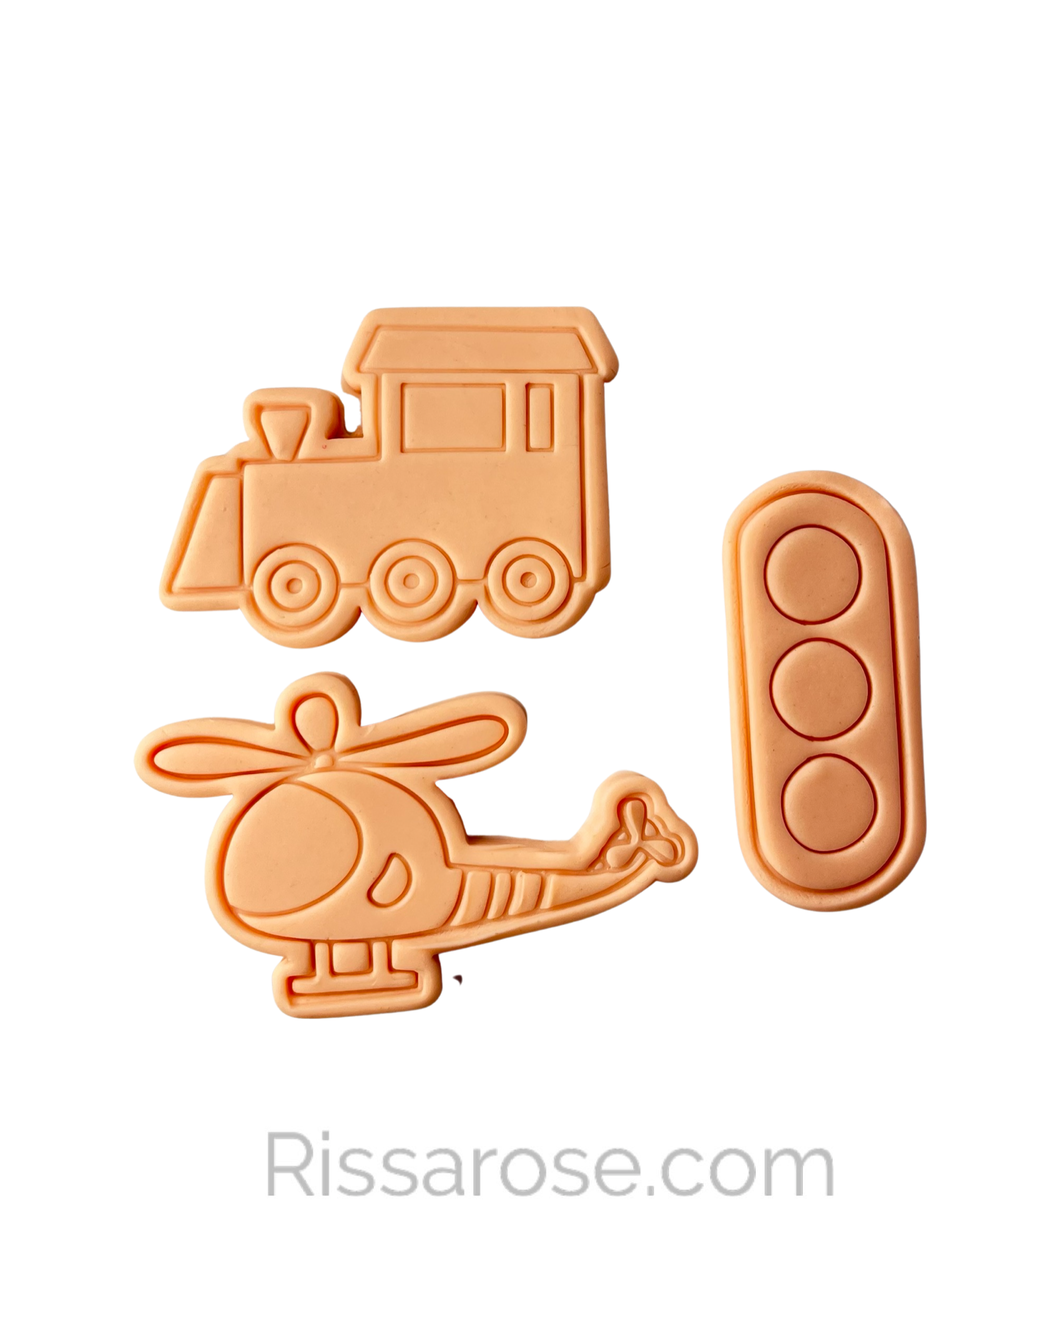 Transportation Road Signs Cookie Cutter Stamp Stop Sign Crossing Tree Airplane Parking Traffic light Ambulance Train